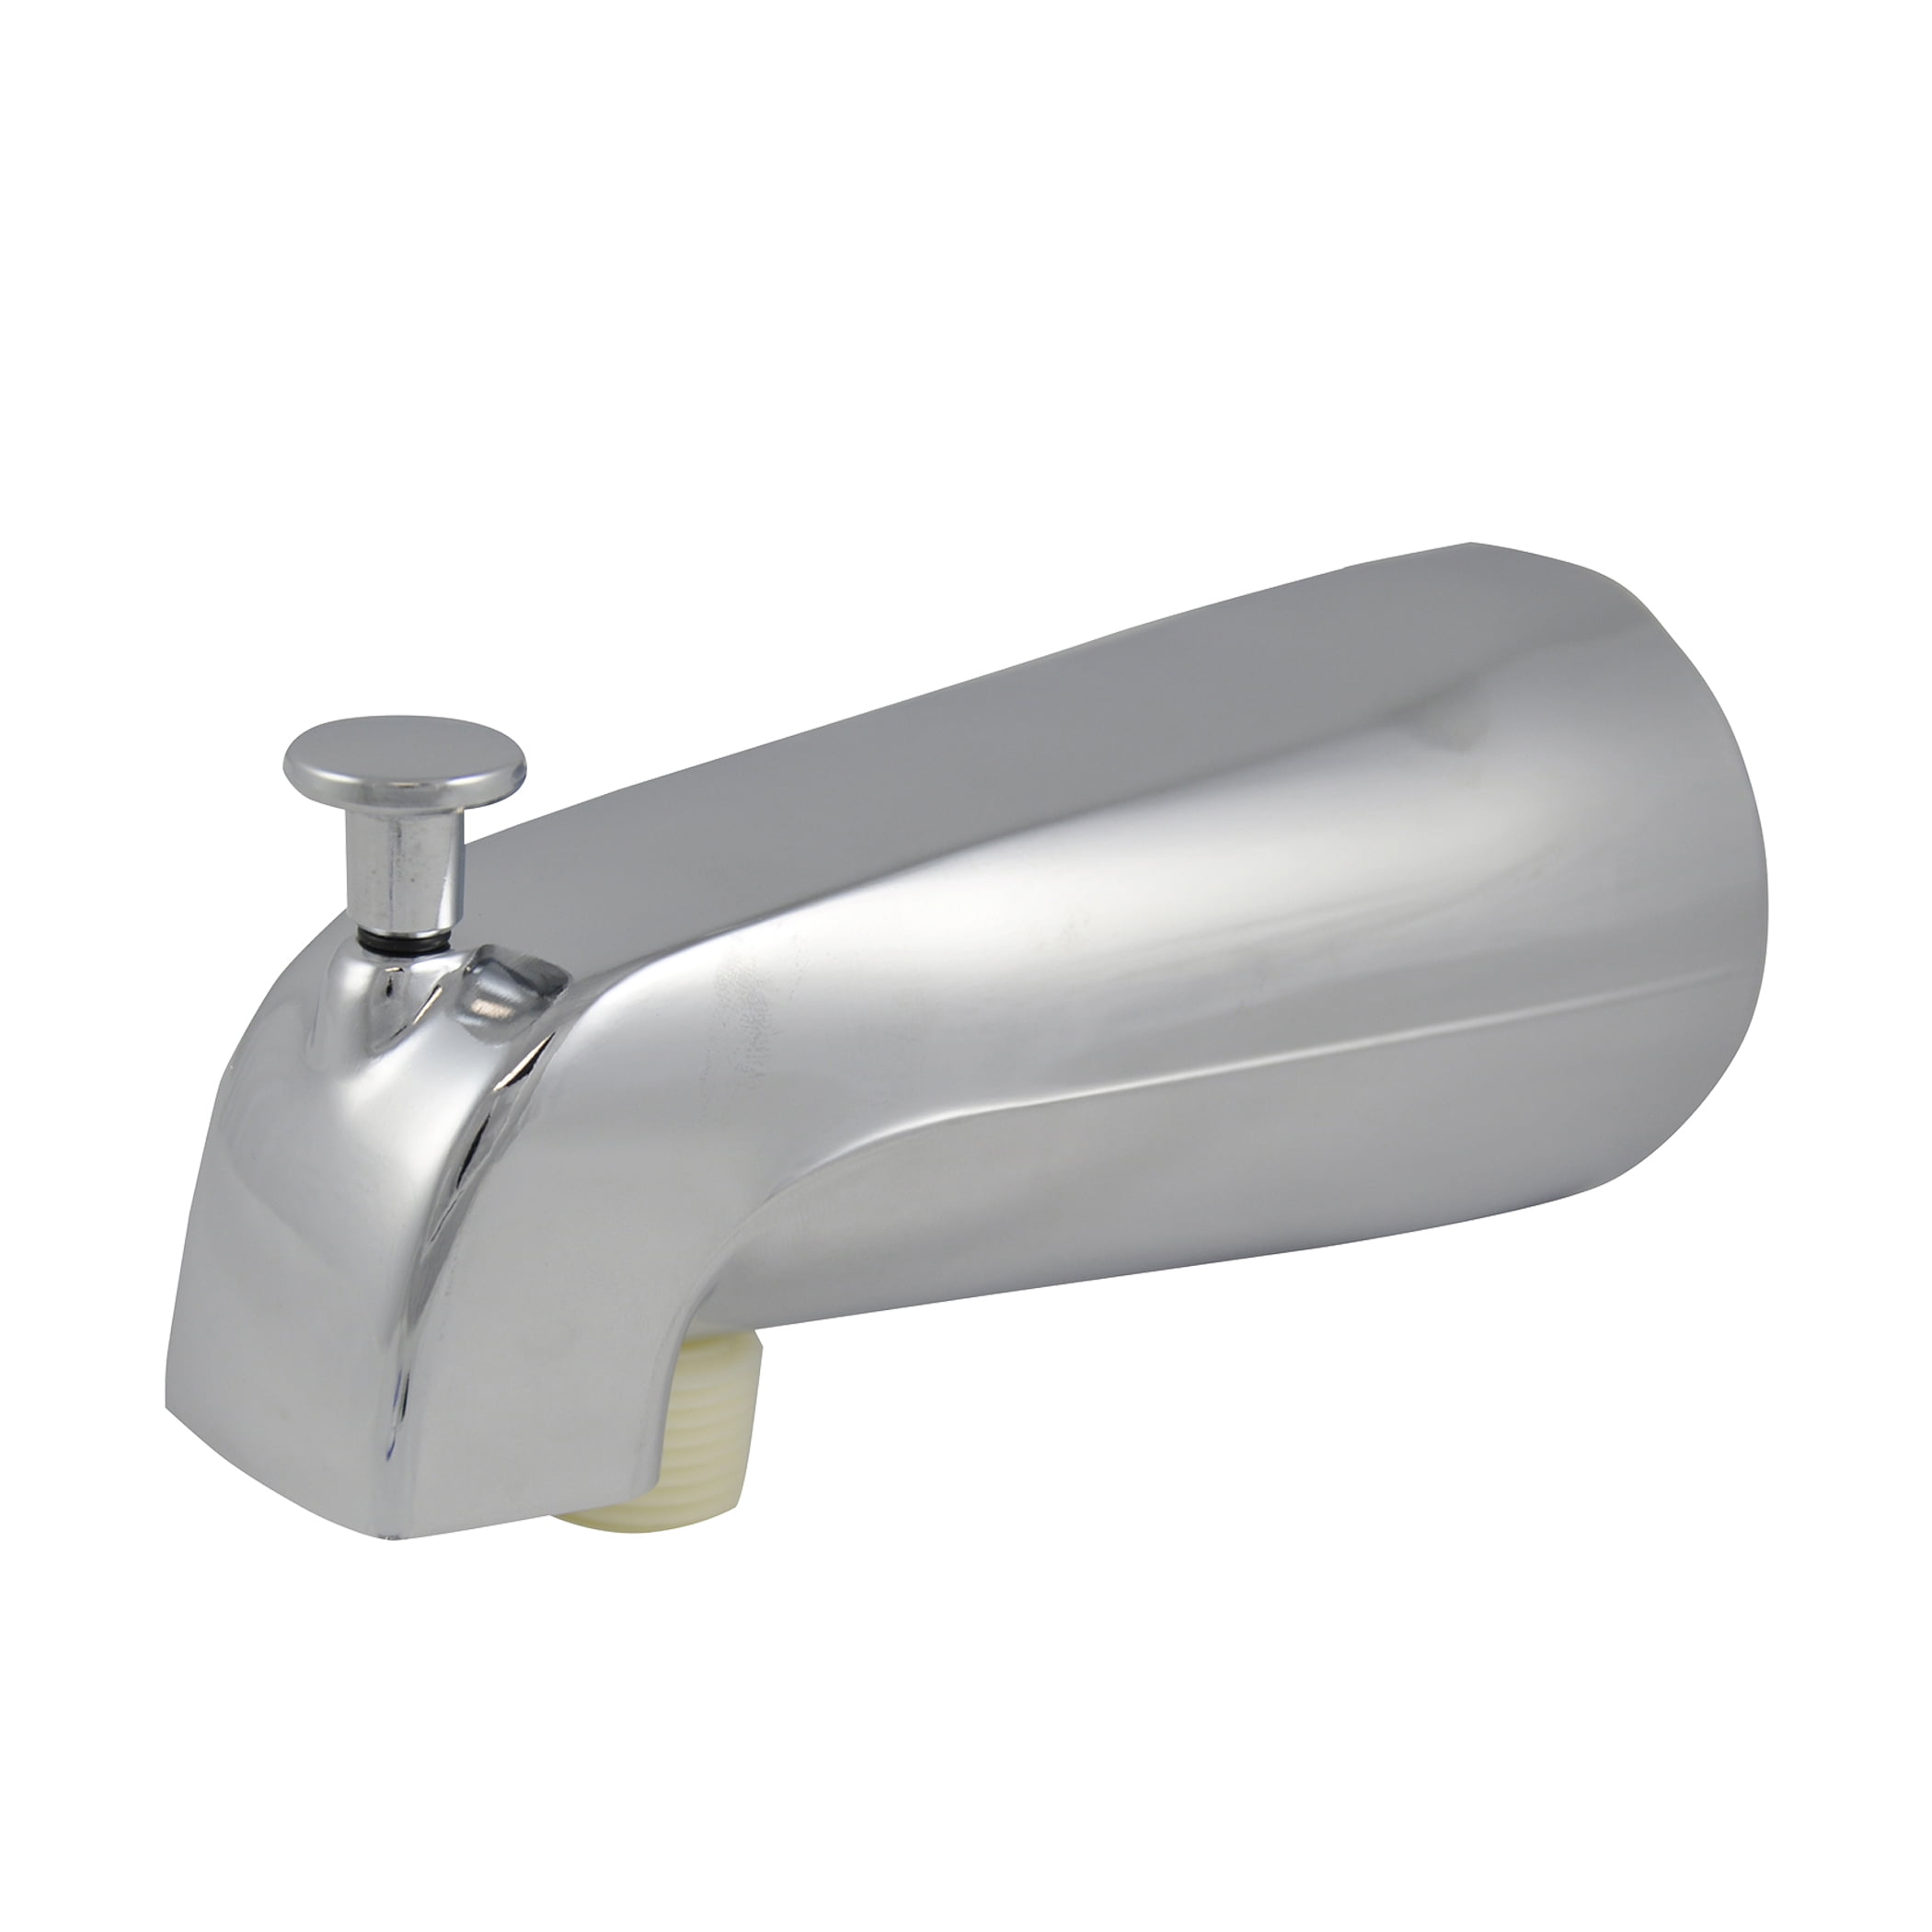 Danco Universal Tub Spout With Handheld, Can You Replace A Shower With Bathtub Spout Diverter